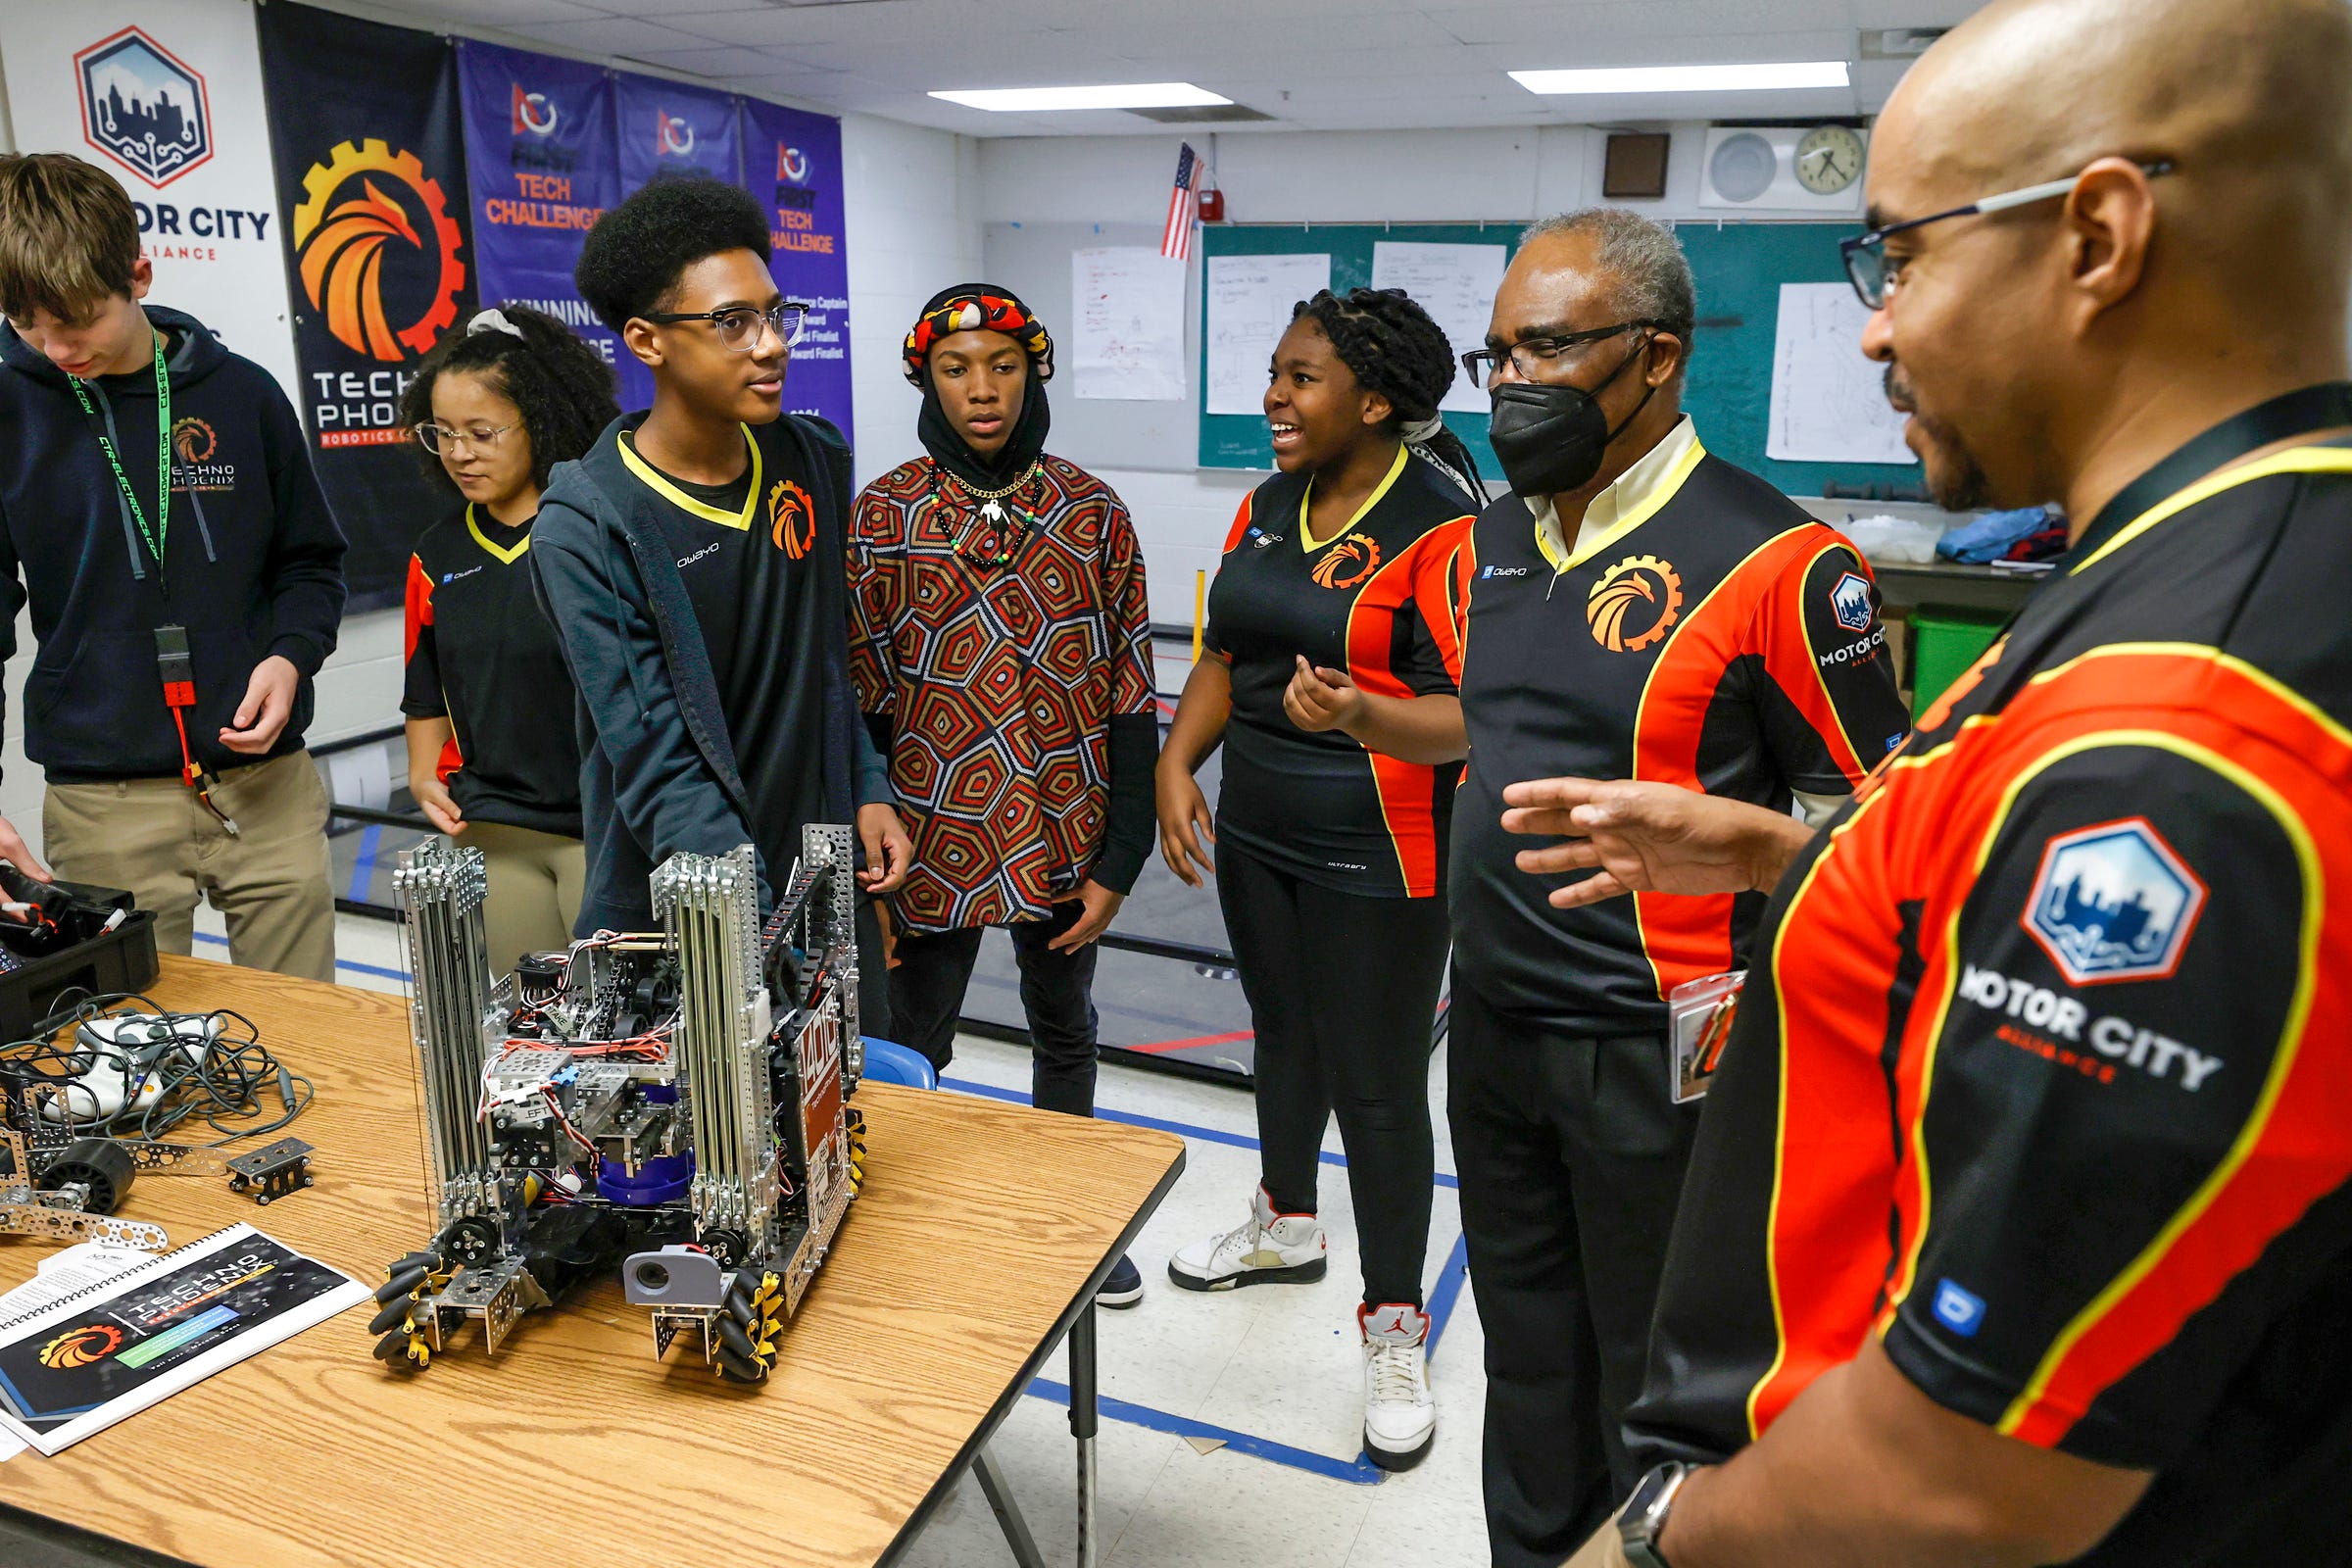 (Center) Aslan Fleming, 13 listens to his coaches Jean-Claude Quenum and Leon Pryor before the start of practice at the Foreign Language Immersion And Cultural Studies School in Detroit on Friday, Feb. 10, 2023. The team qualified for the world robotics championship that happens in Houston, Texas in April and they are the first Detroit middle school to compete in it.